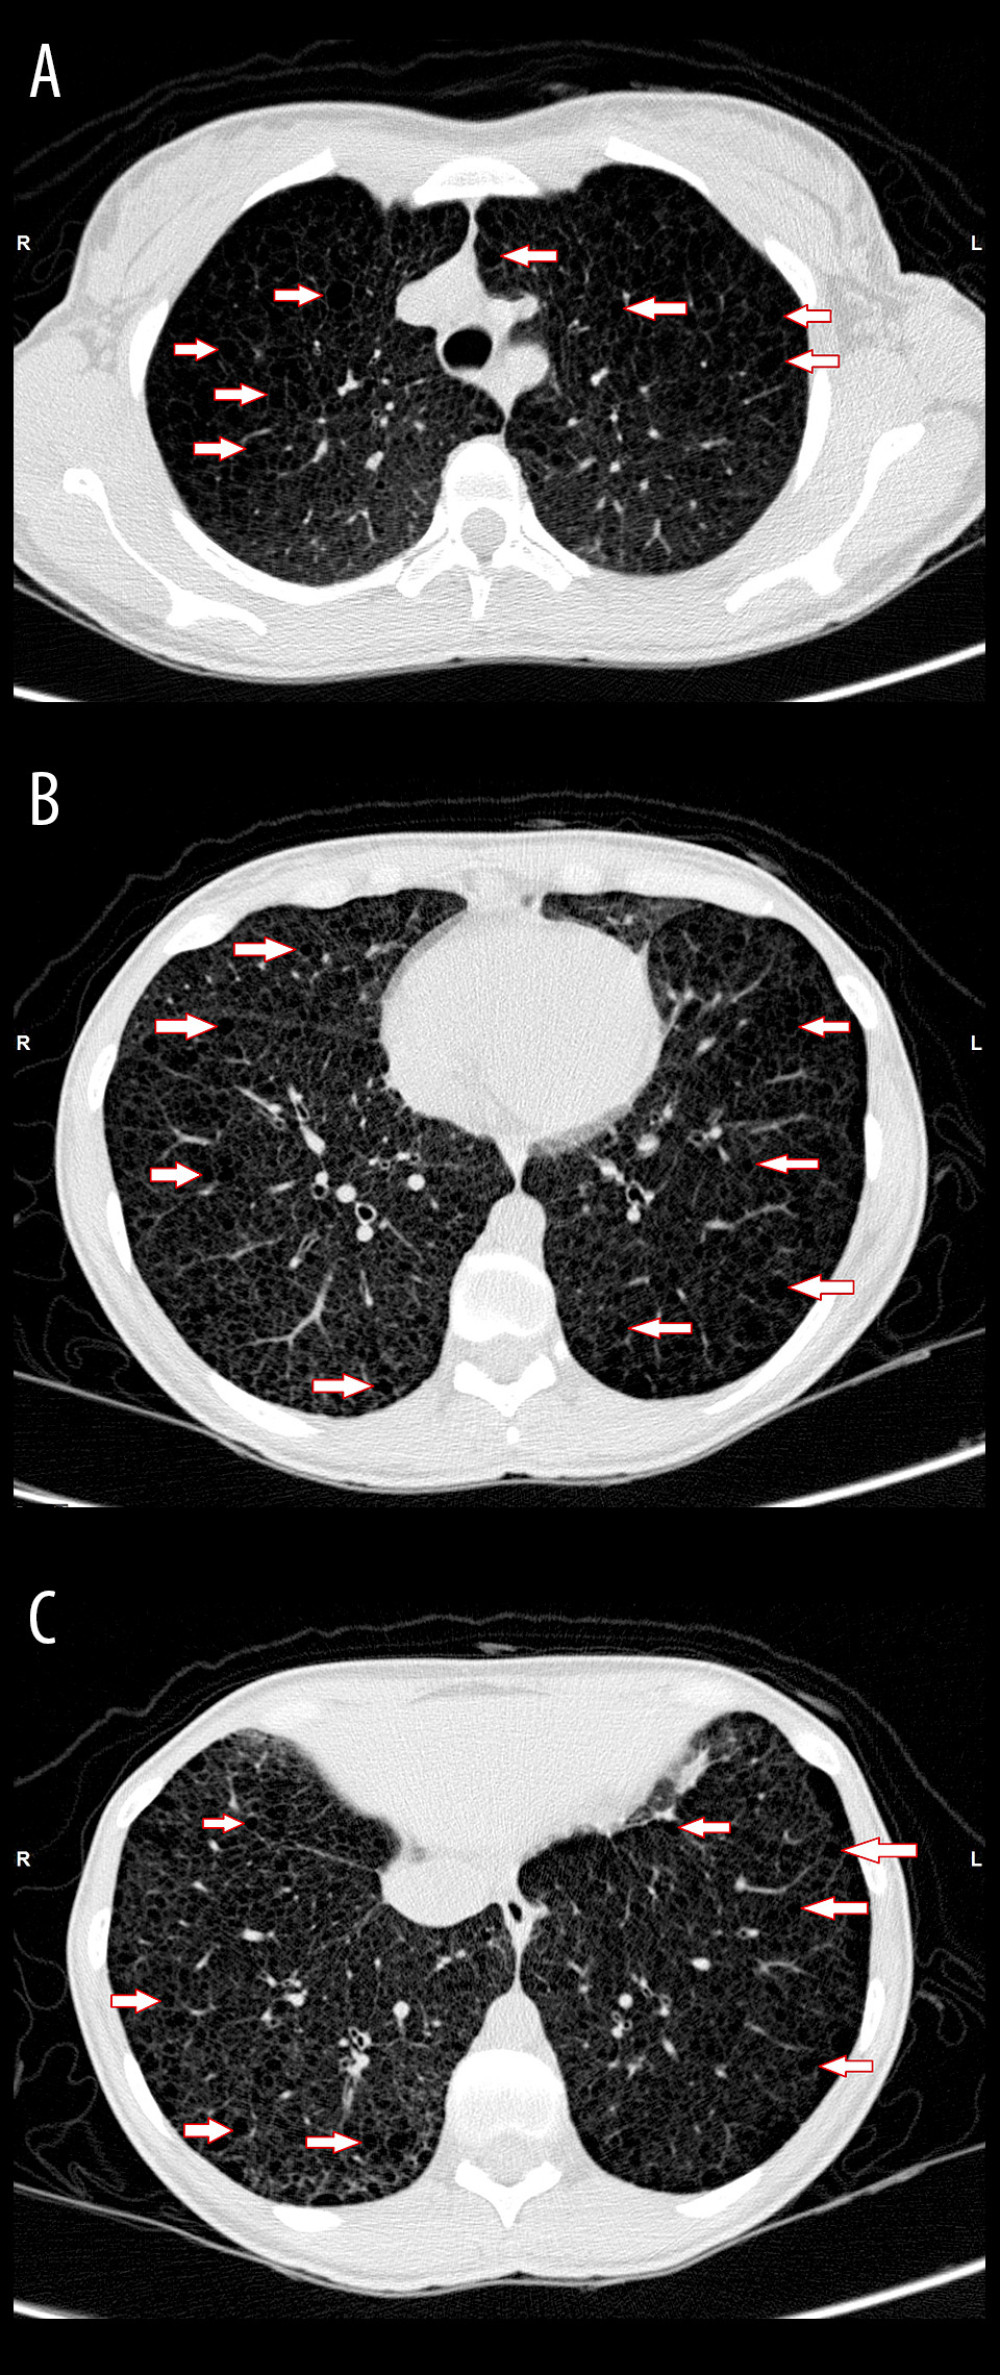 Chest computed tomography images of the patient when the diagnosis of pulmonary lymphangioleiomyomatosis was made. (A) The superior lobes show diffuse, rounded, bilateral, and thin-walled cysts of varying sizes (arrows). (B) The average portion of the lungs shows diffuse, rounded, bilateral, and thin-walled cysts (arrows). (C) The lower lobes show diffuse, rounded, bilateral and thin-walled cysts (arrows).